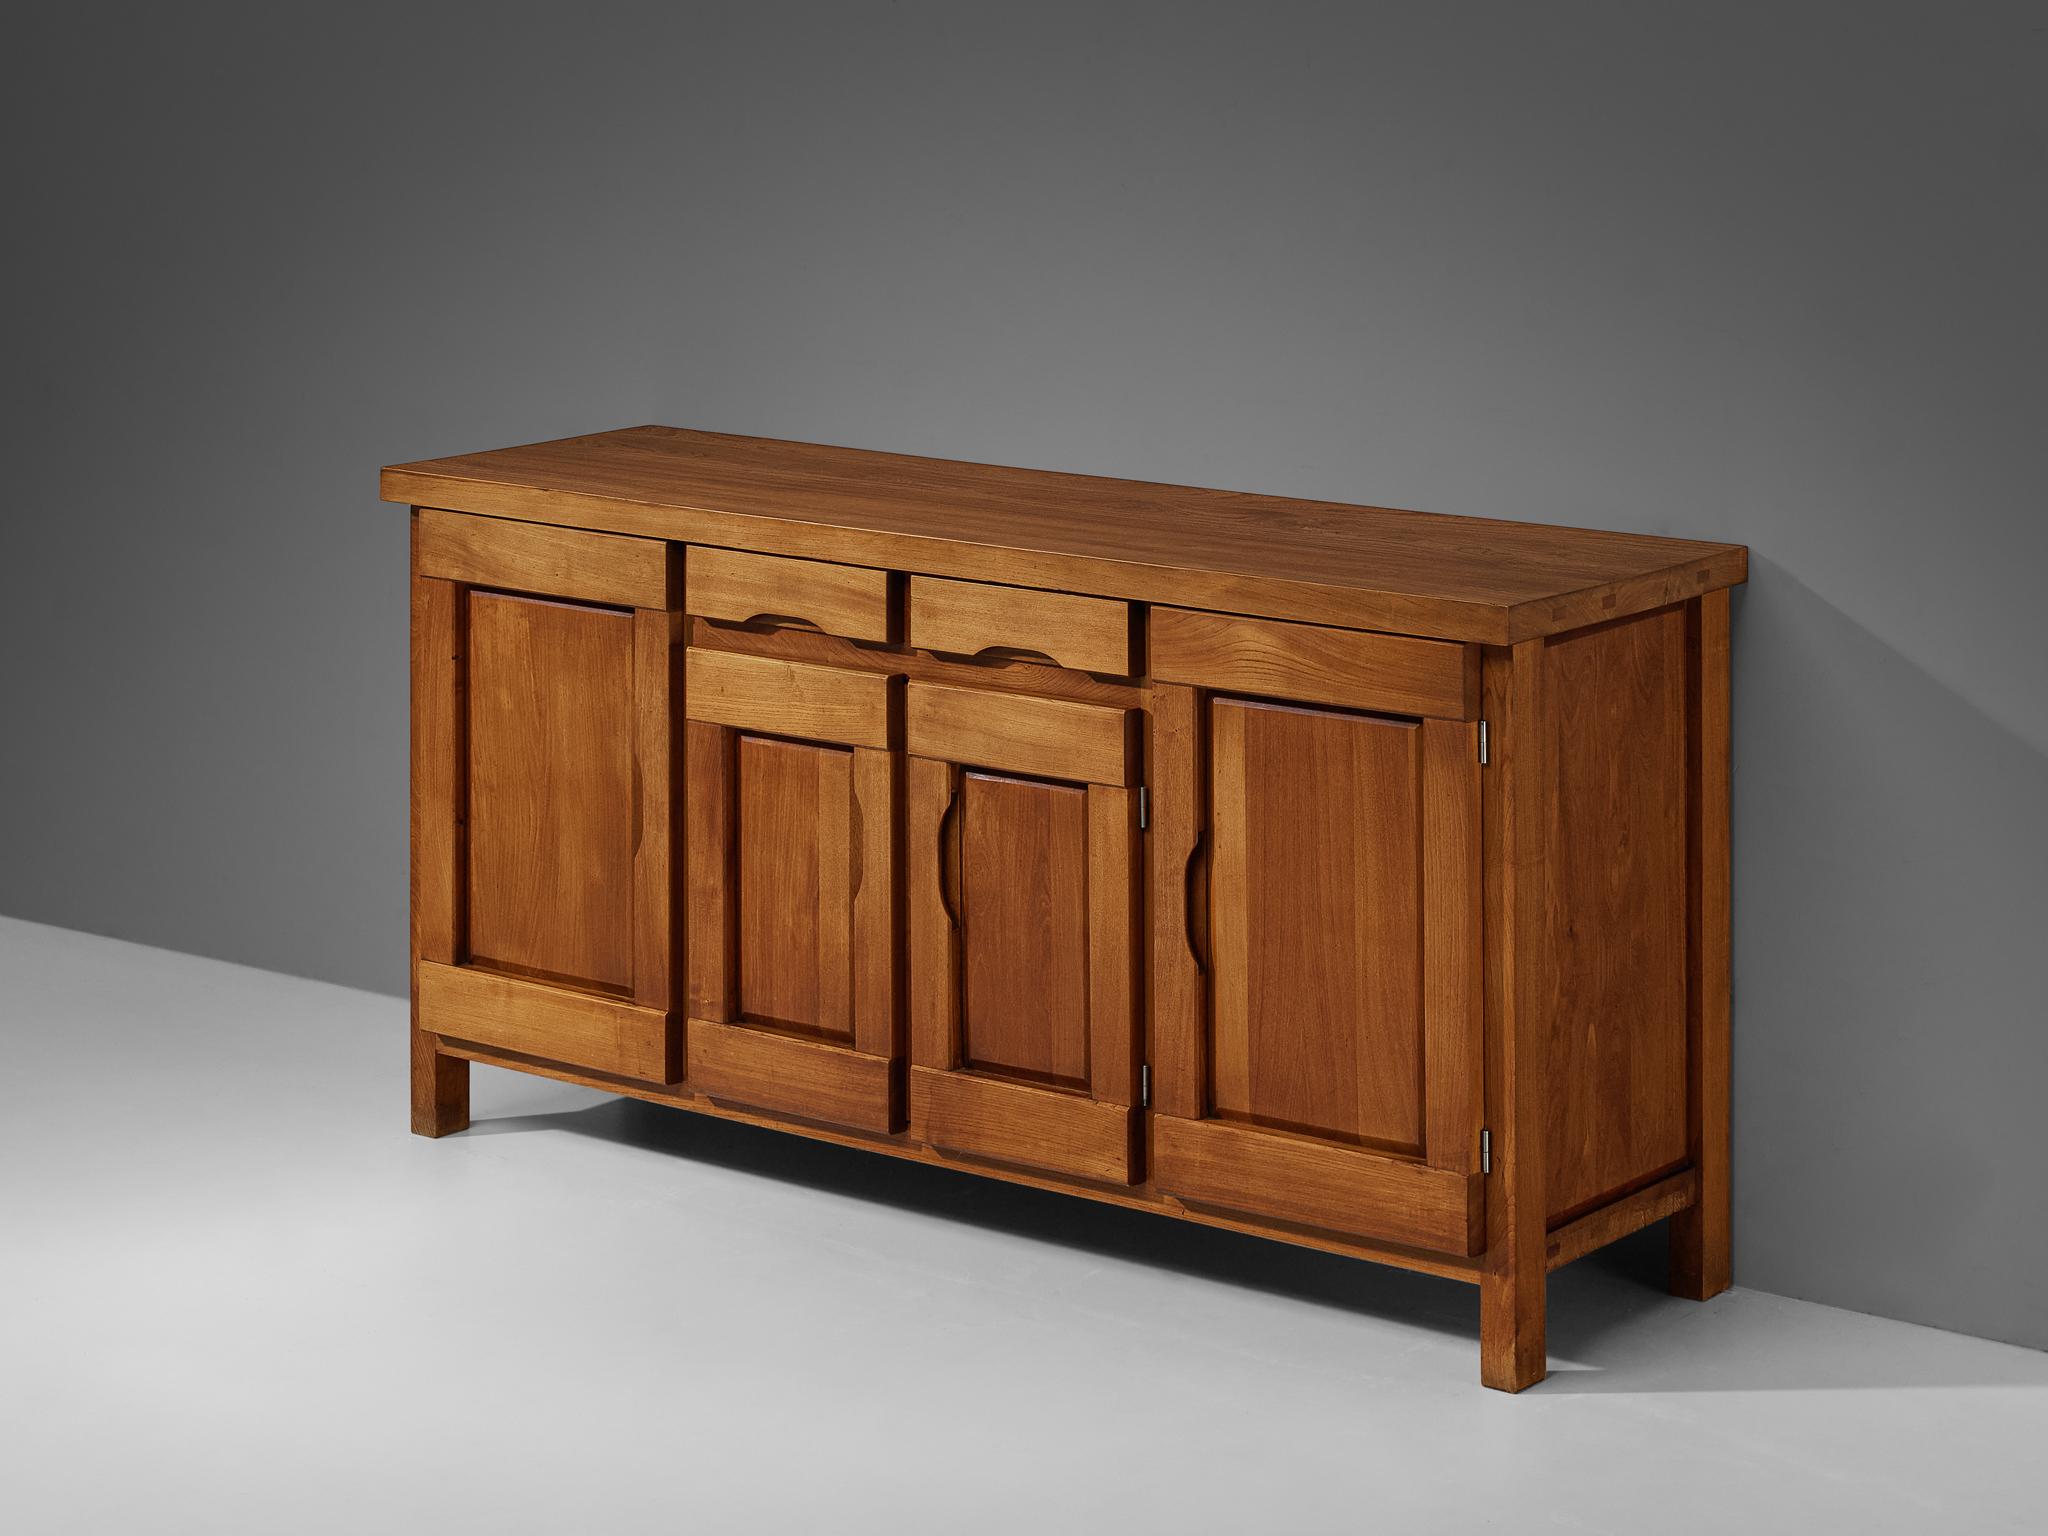 Atelier C. Demoyen sideboard, elm, France, 1970s

Gorgeous and naturalistic sideboard designed by Atelier C. Demoyen in the 1970s. Made in elm wood, this piece casts a stunning and rich atmosphere because of the use of this warm wood type. With